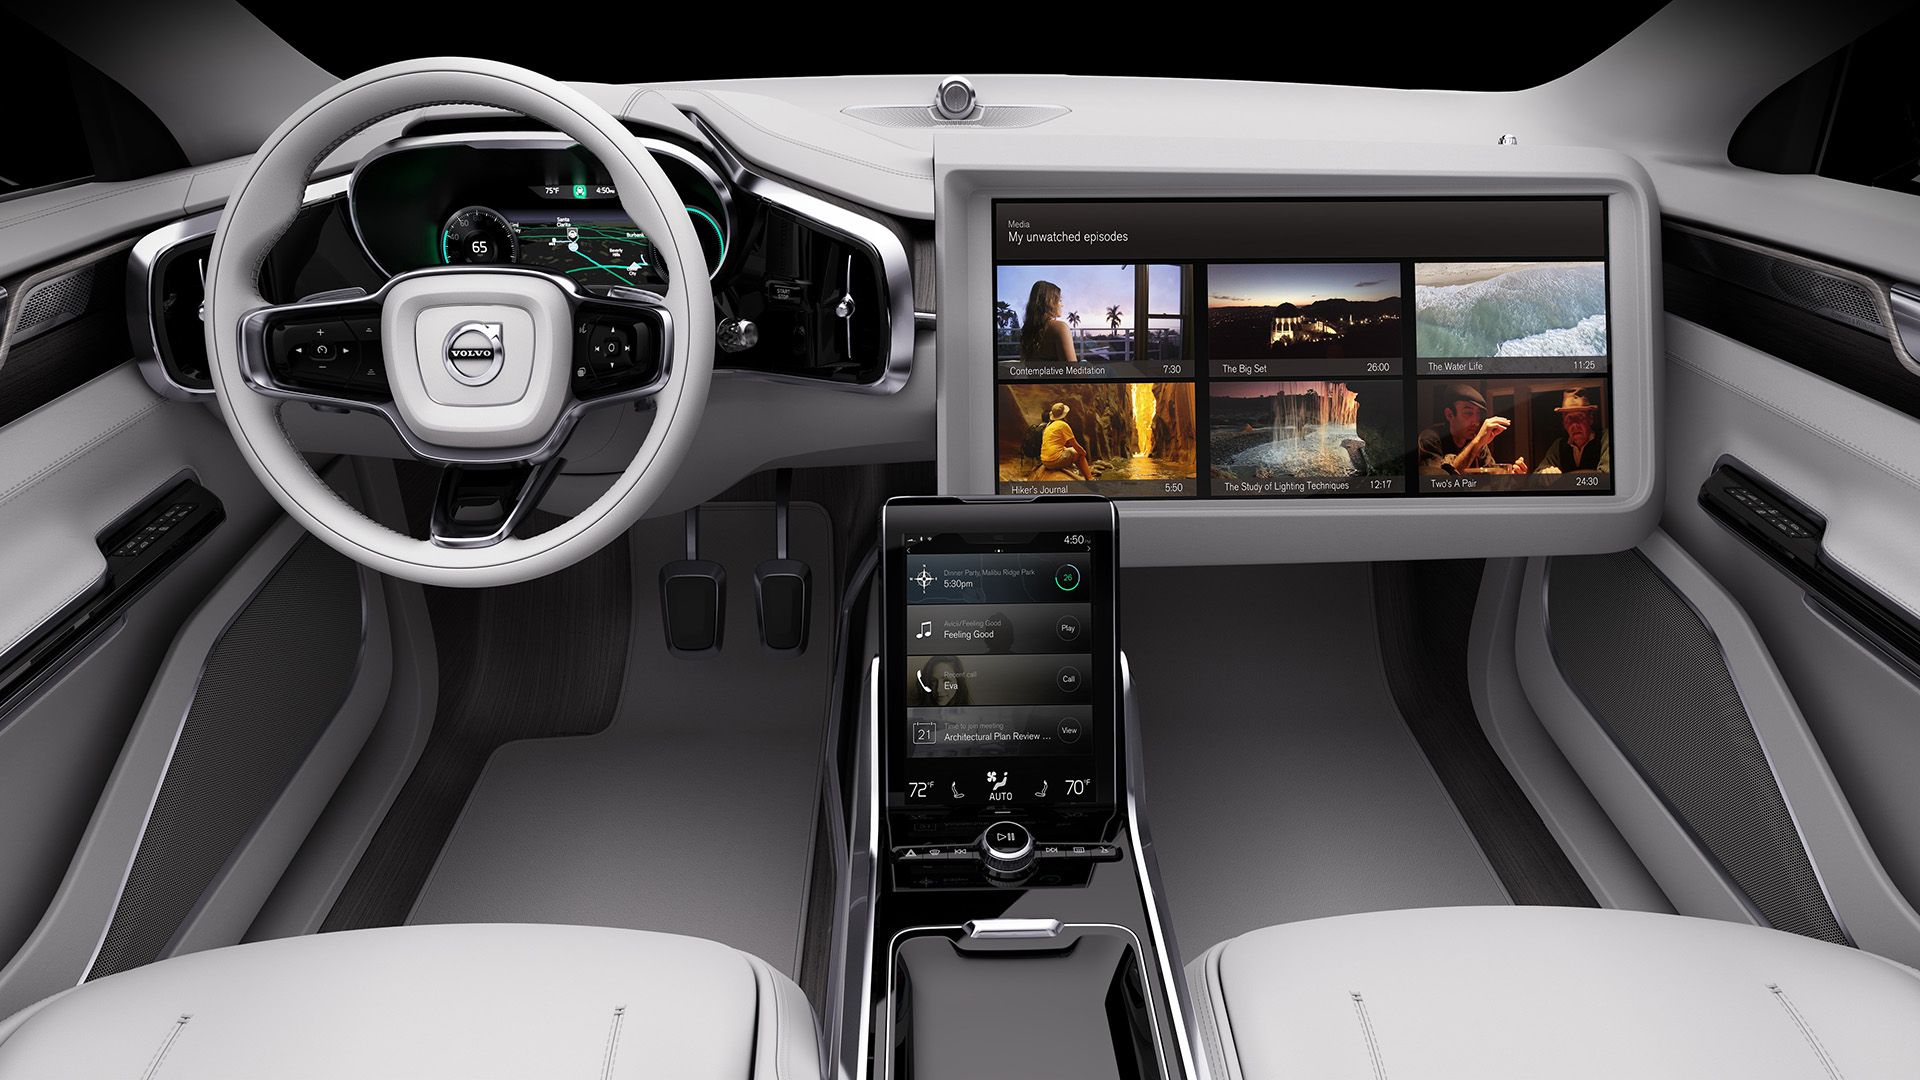 Volvo and Ericsson Believe the Future Involves Watching Netflix While Driving